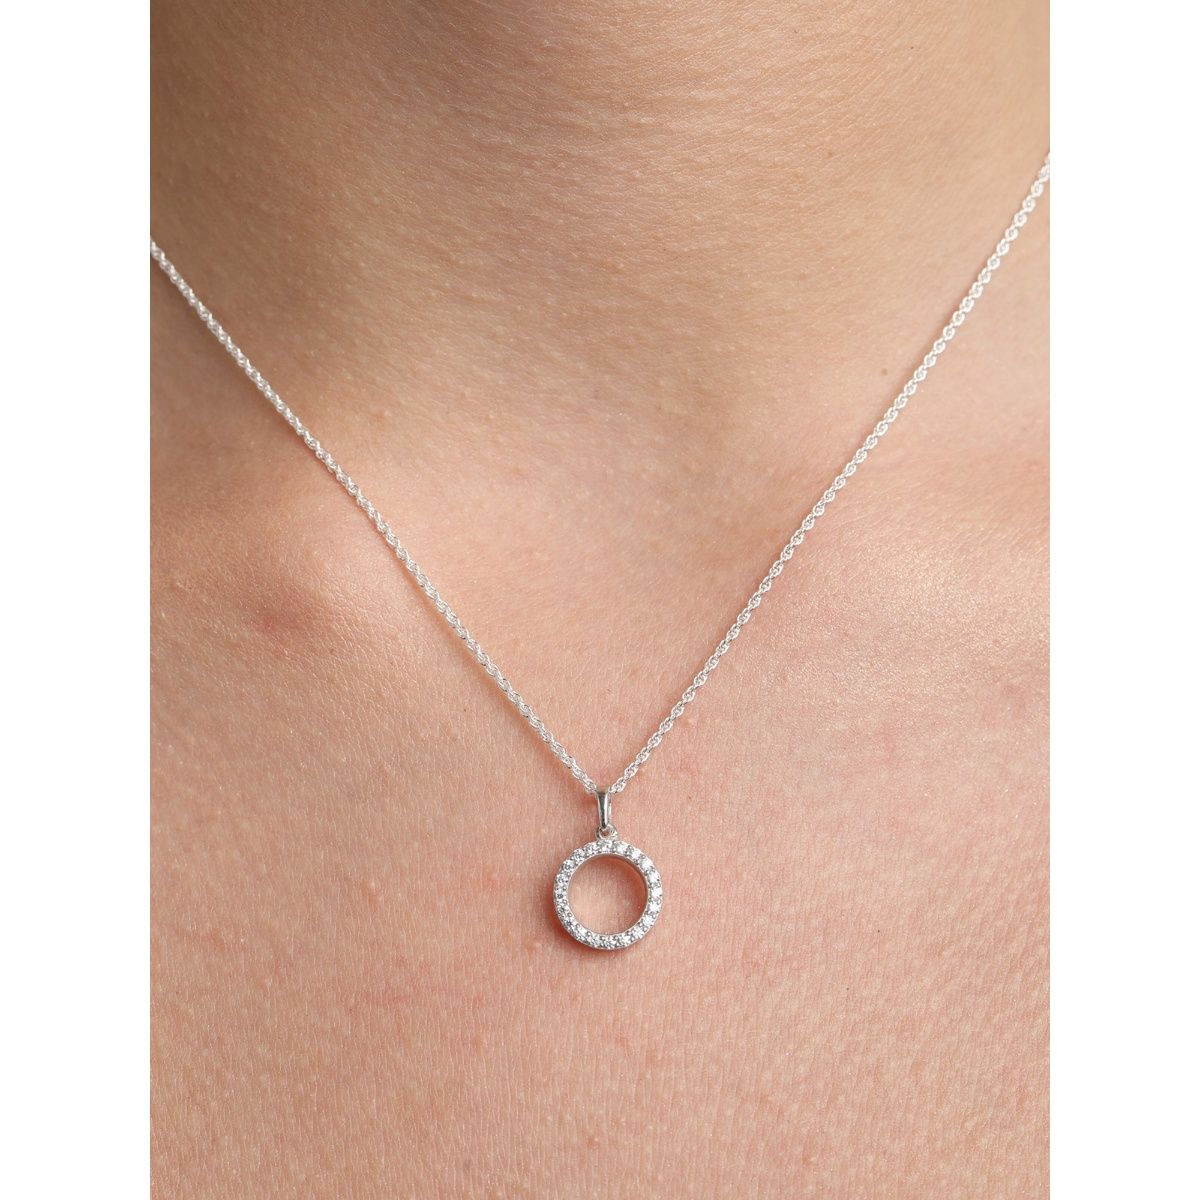 Sterling Silver Coin Necklace, Tiny Silver Medallion Necklace for Wome–  annikabella